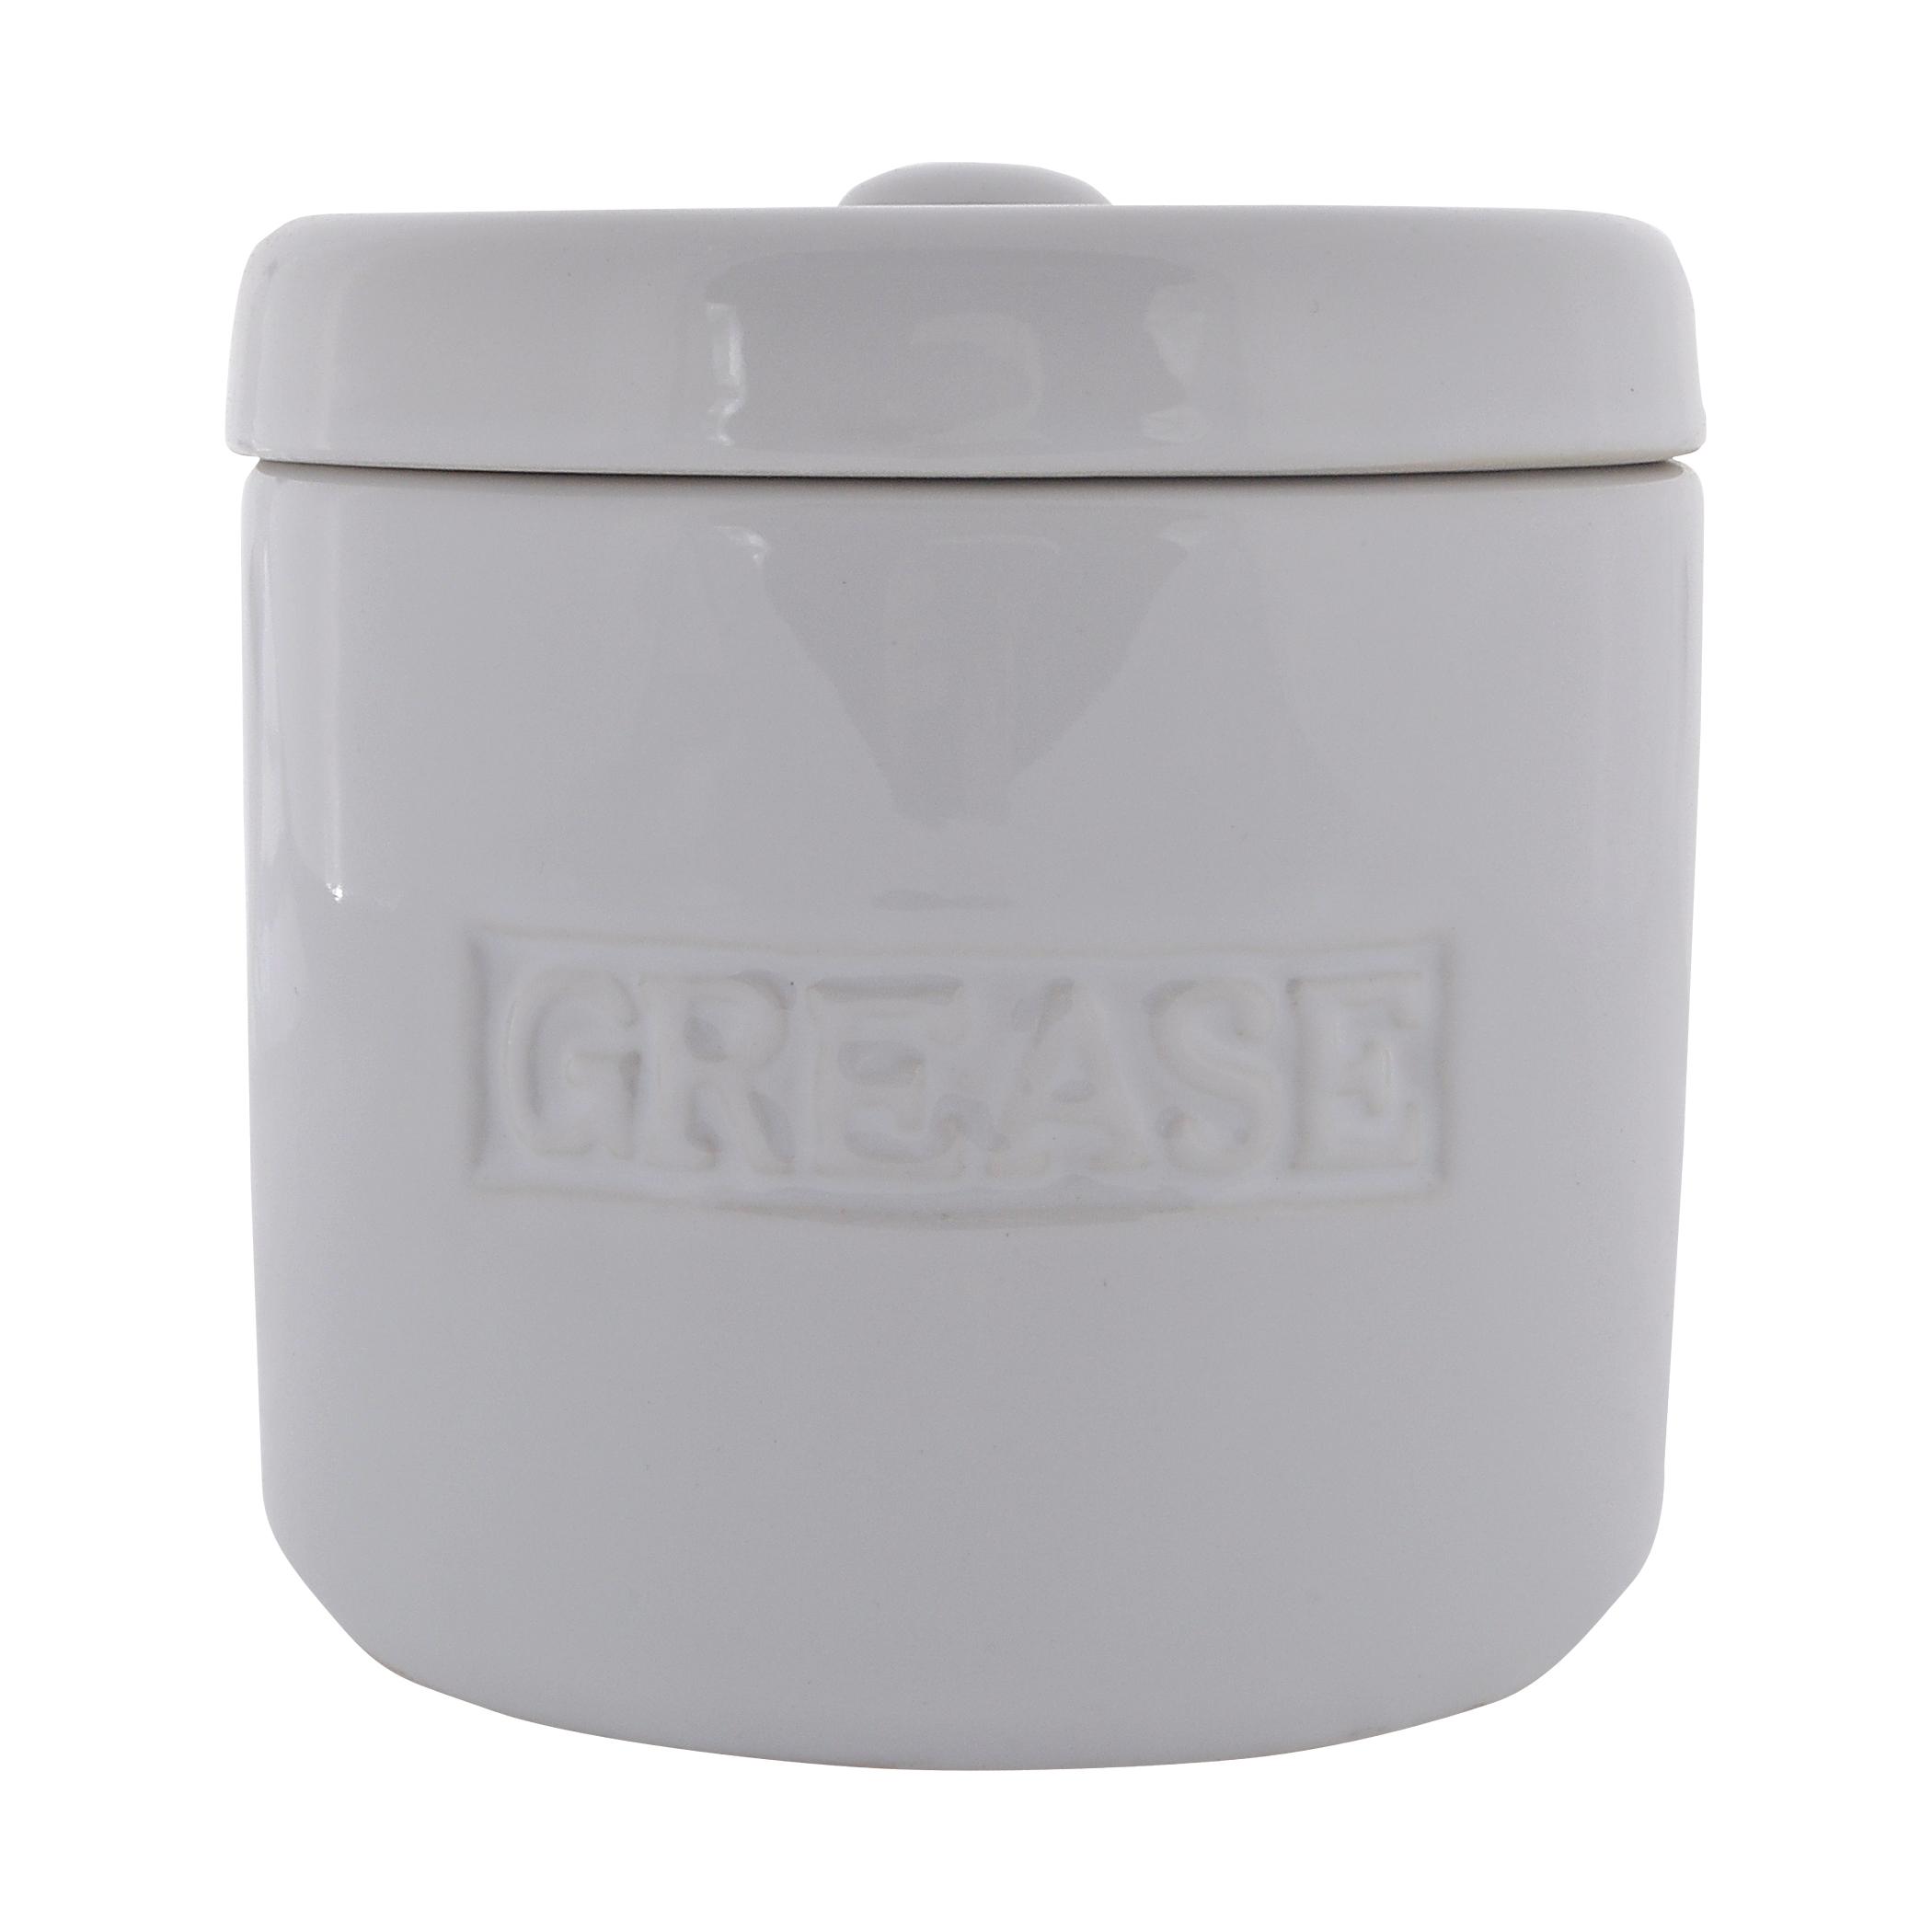 Grease Pot / Ceramic Grease Holder / Bacon Grease Holder / Handmade Canister  / Cooking Grease Container / Bacon Gift / Christmas 